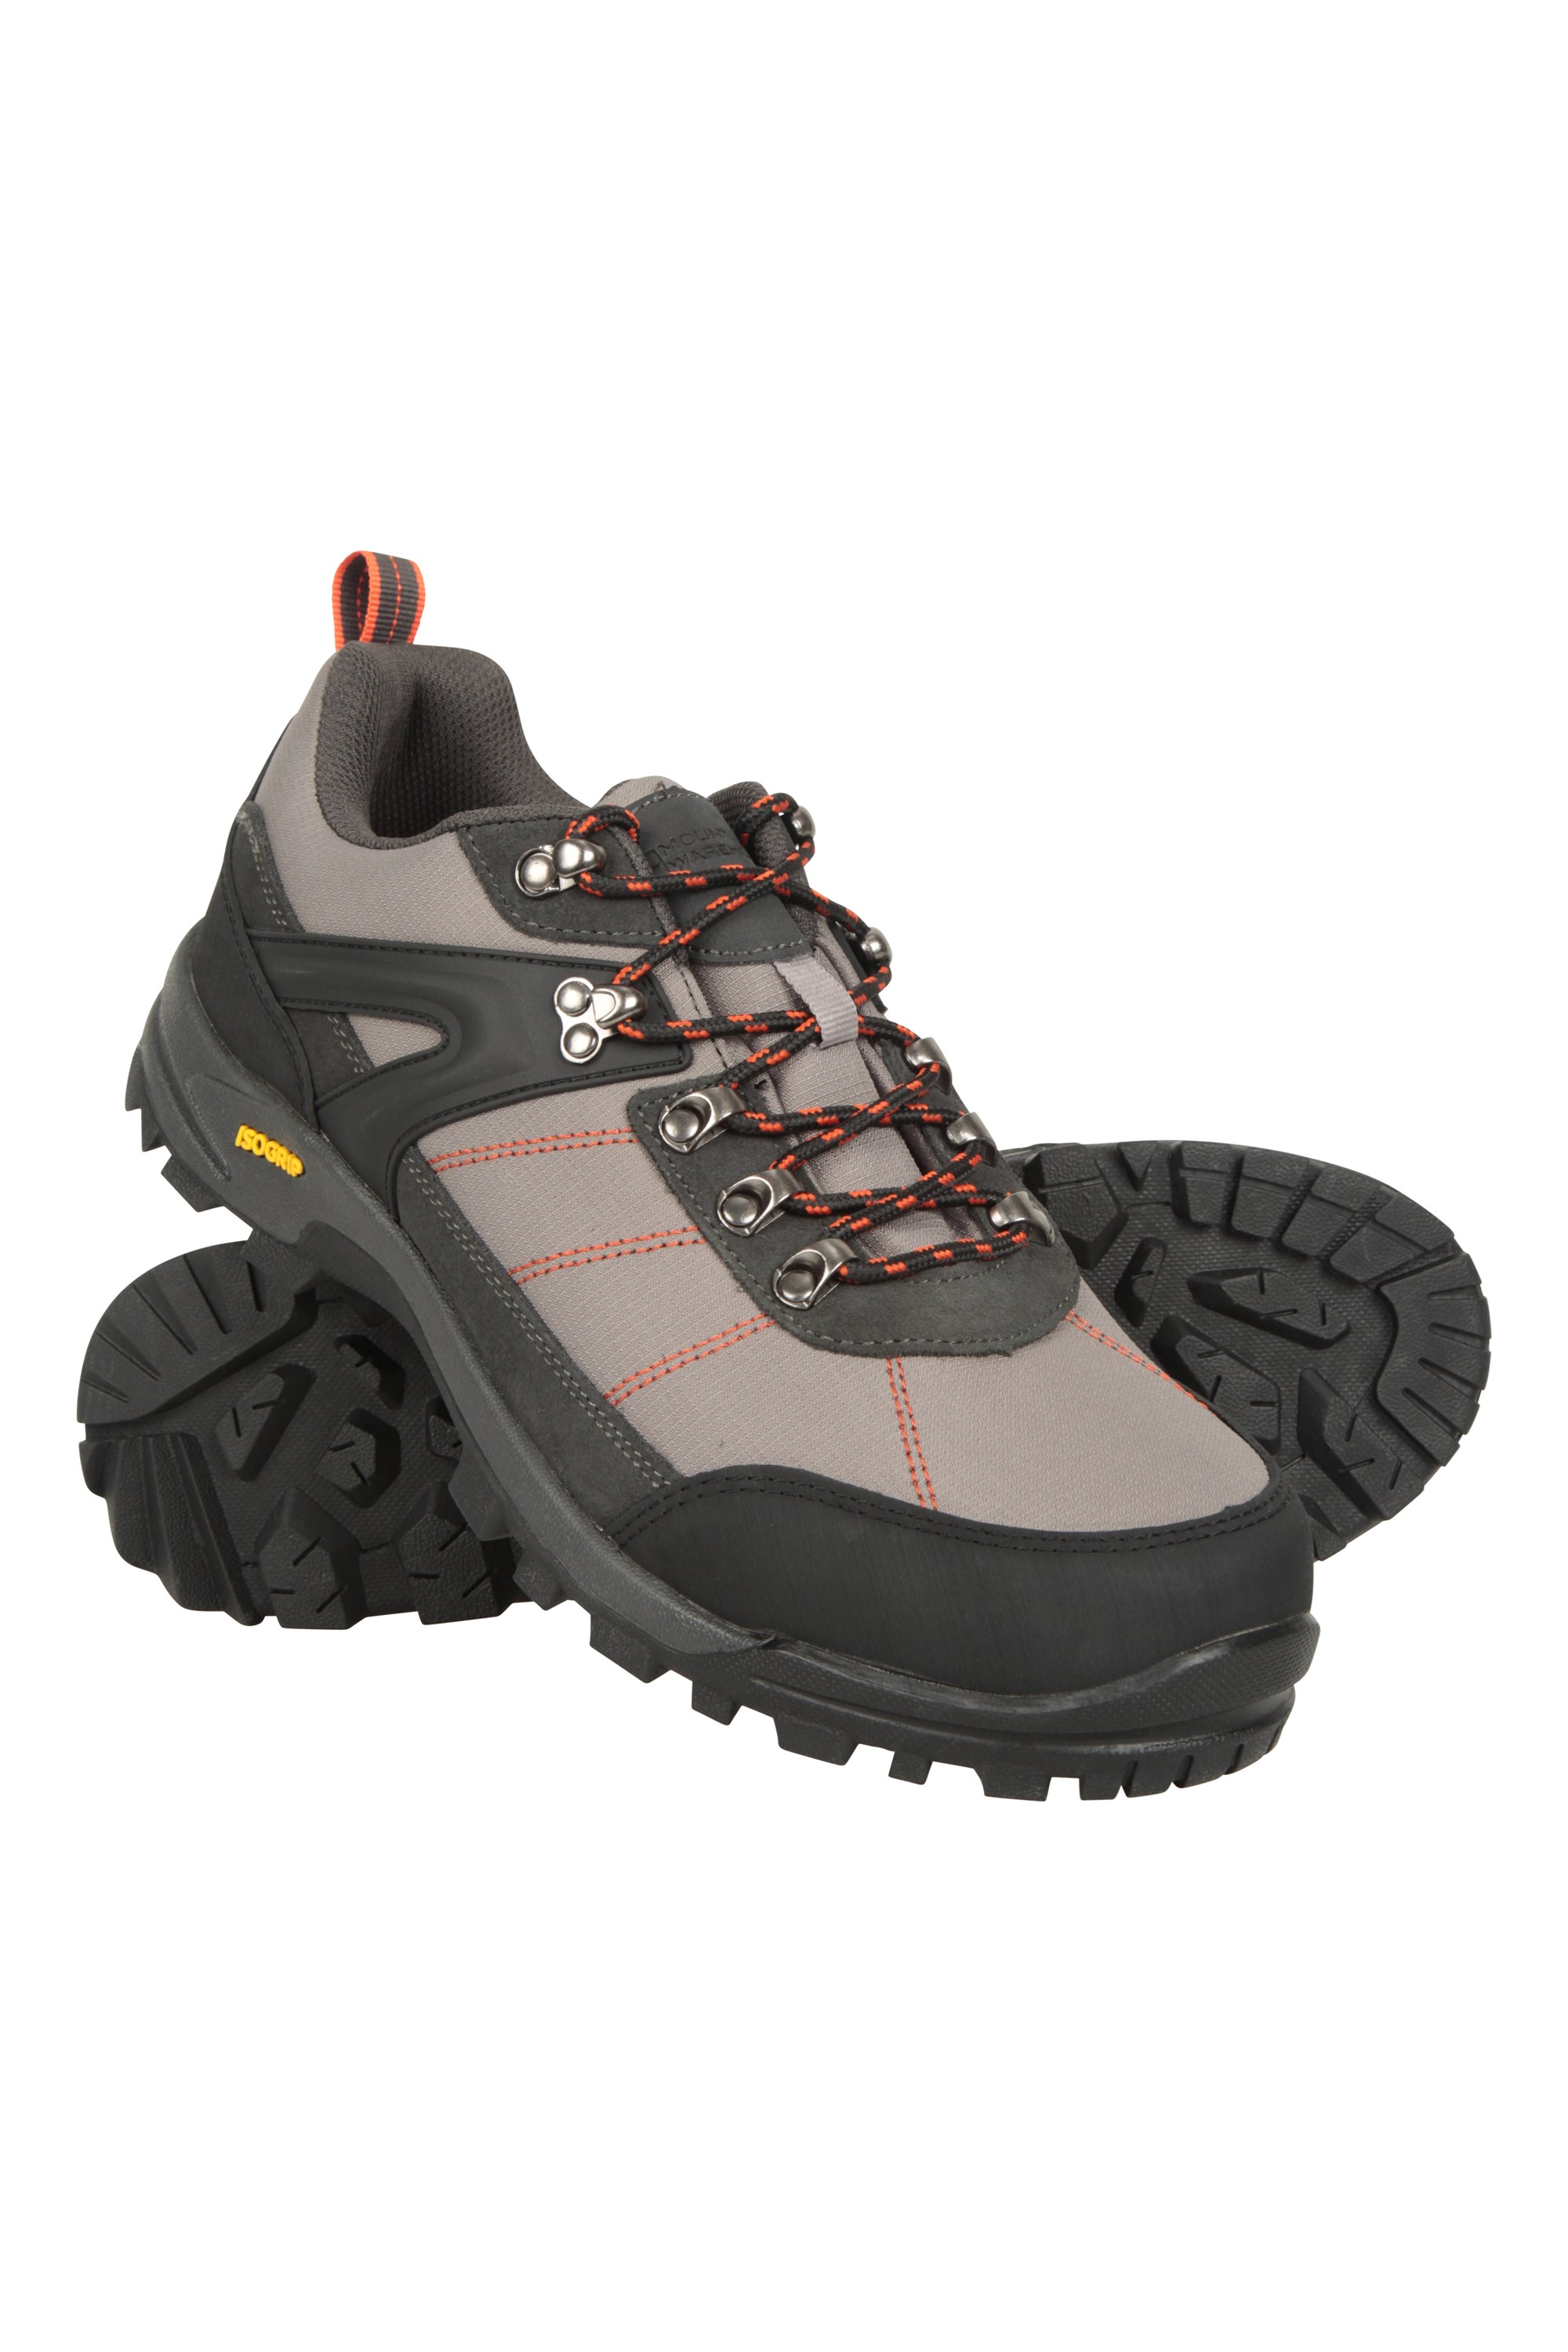 Extreme Storm Mens IsoGrip Hiking Shoes